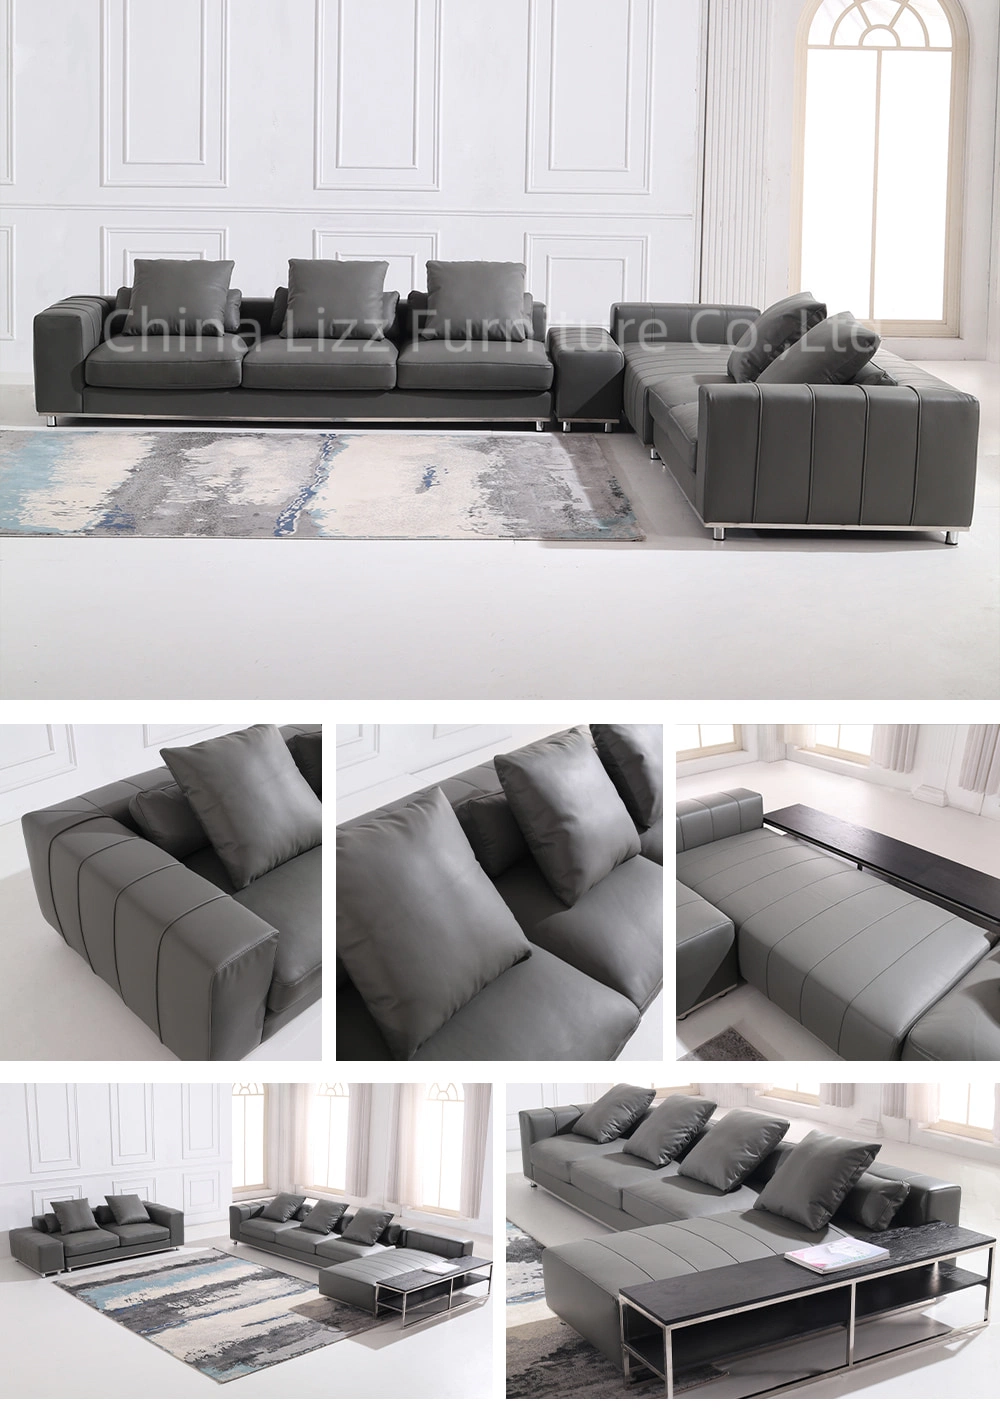 Italian Design Home Furniture Living Room Sectional Sofa Set with Coffee Table